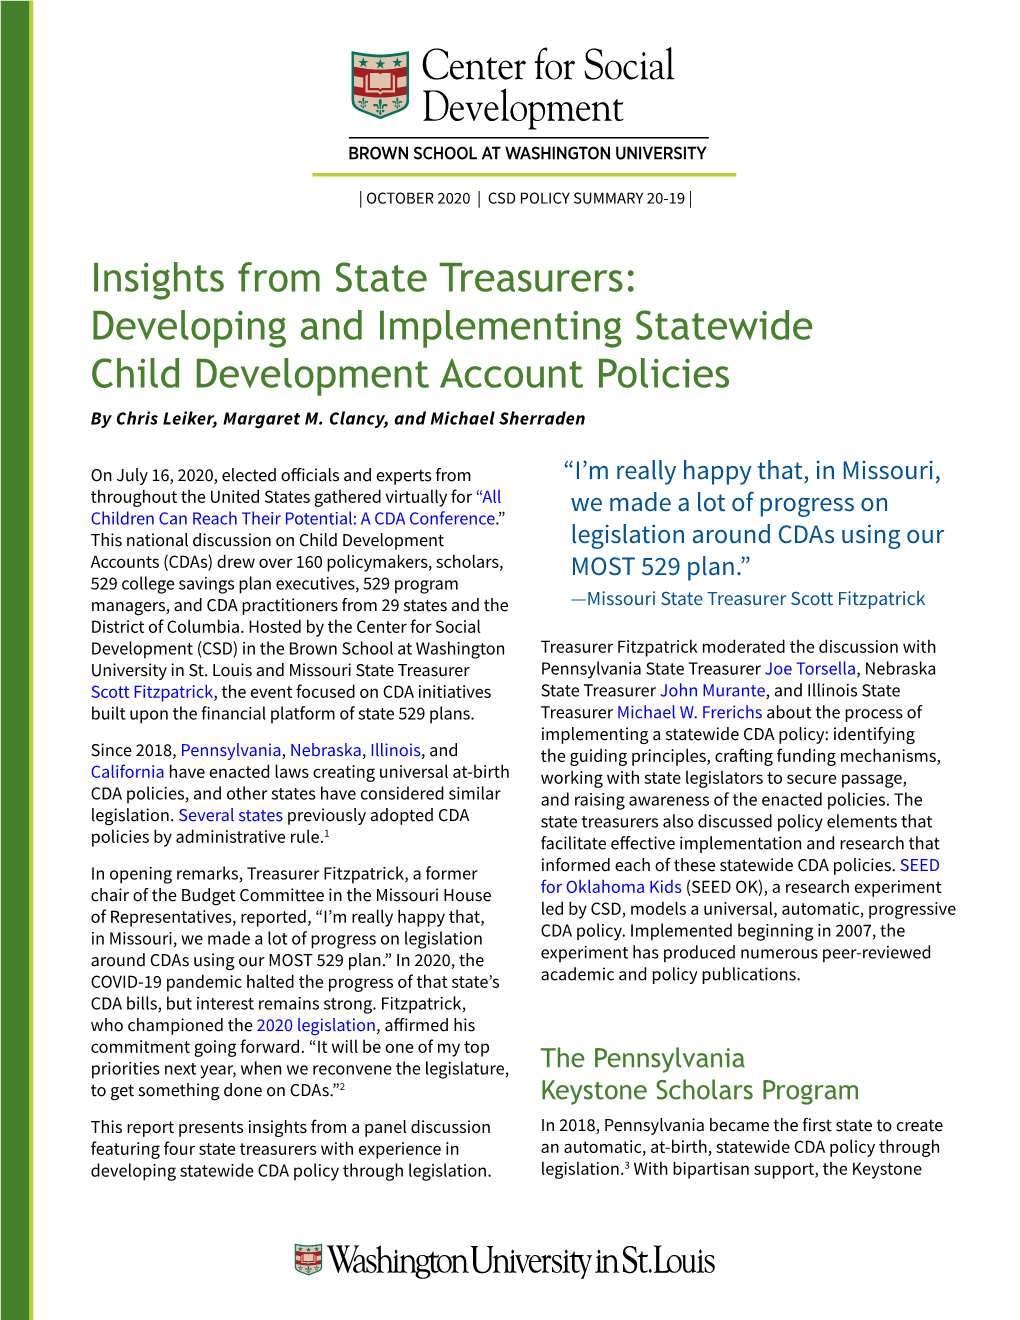 Insights from State Treasurers: Developing and Implementing Statewide Child Development Account Policies by Chris Leiker, Margaret M